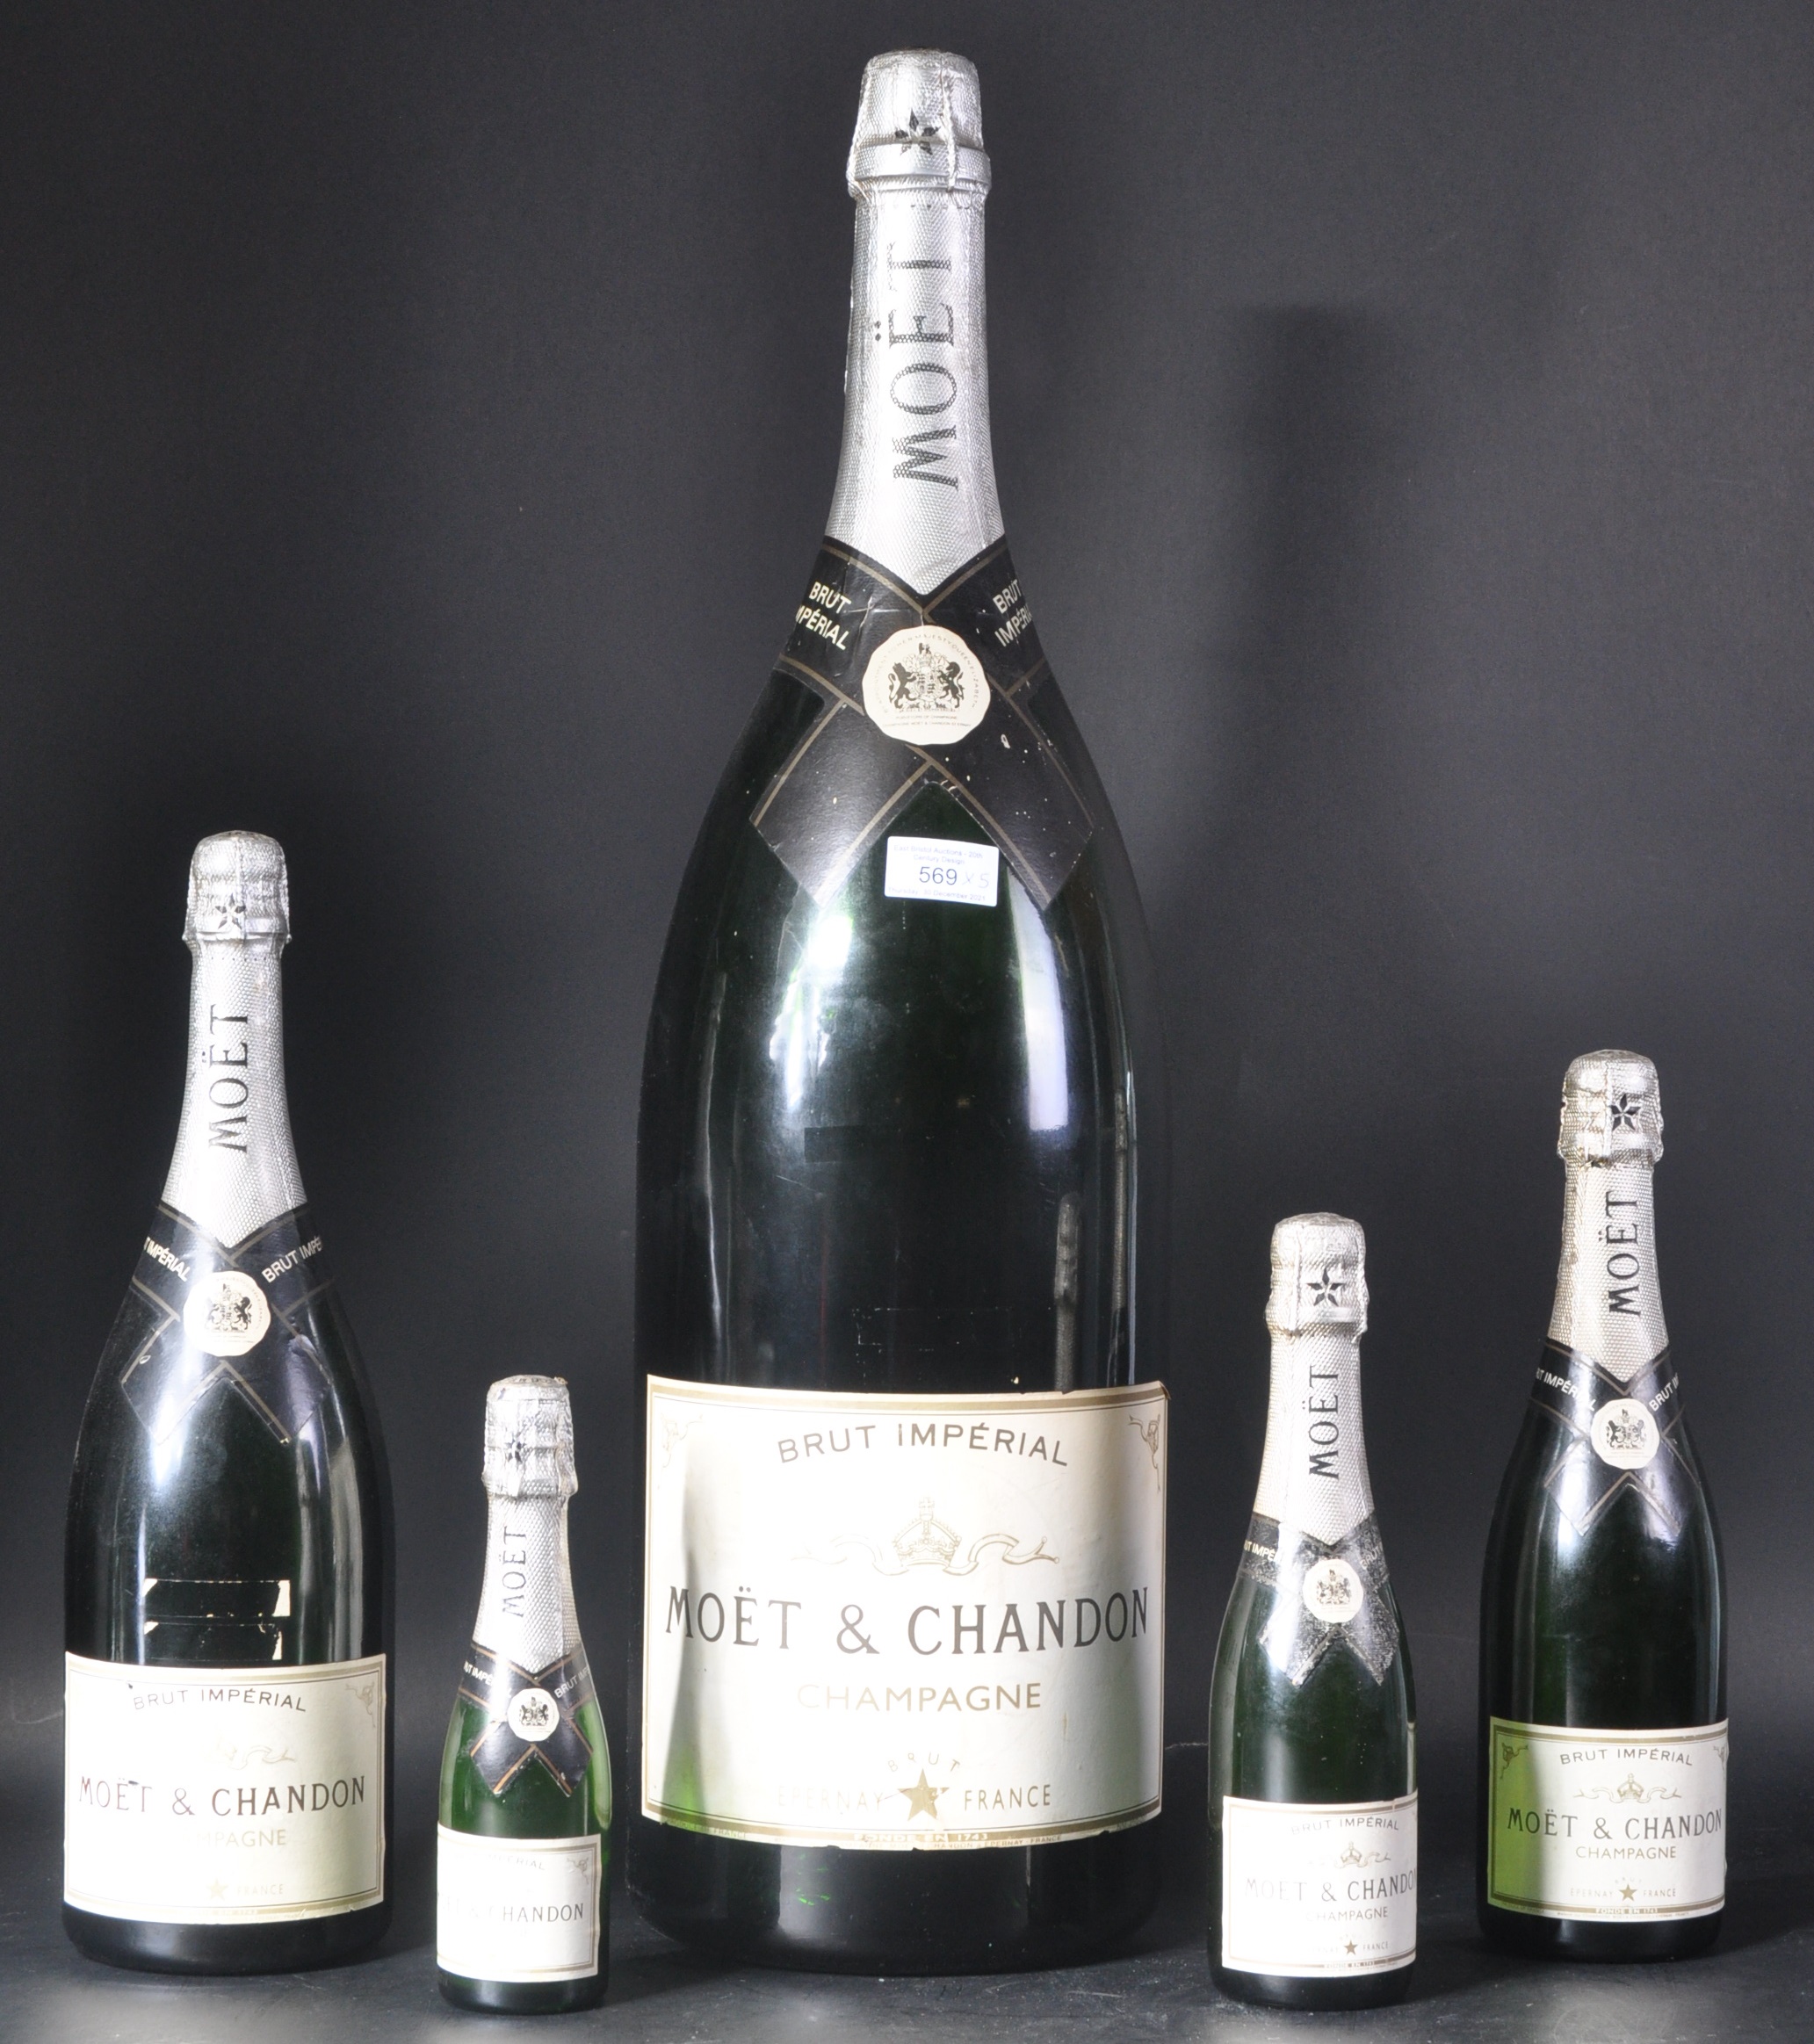 COLLECTION OF MOET CHAMPAGNE DISPLAY BOTTLES